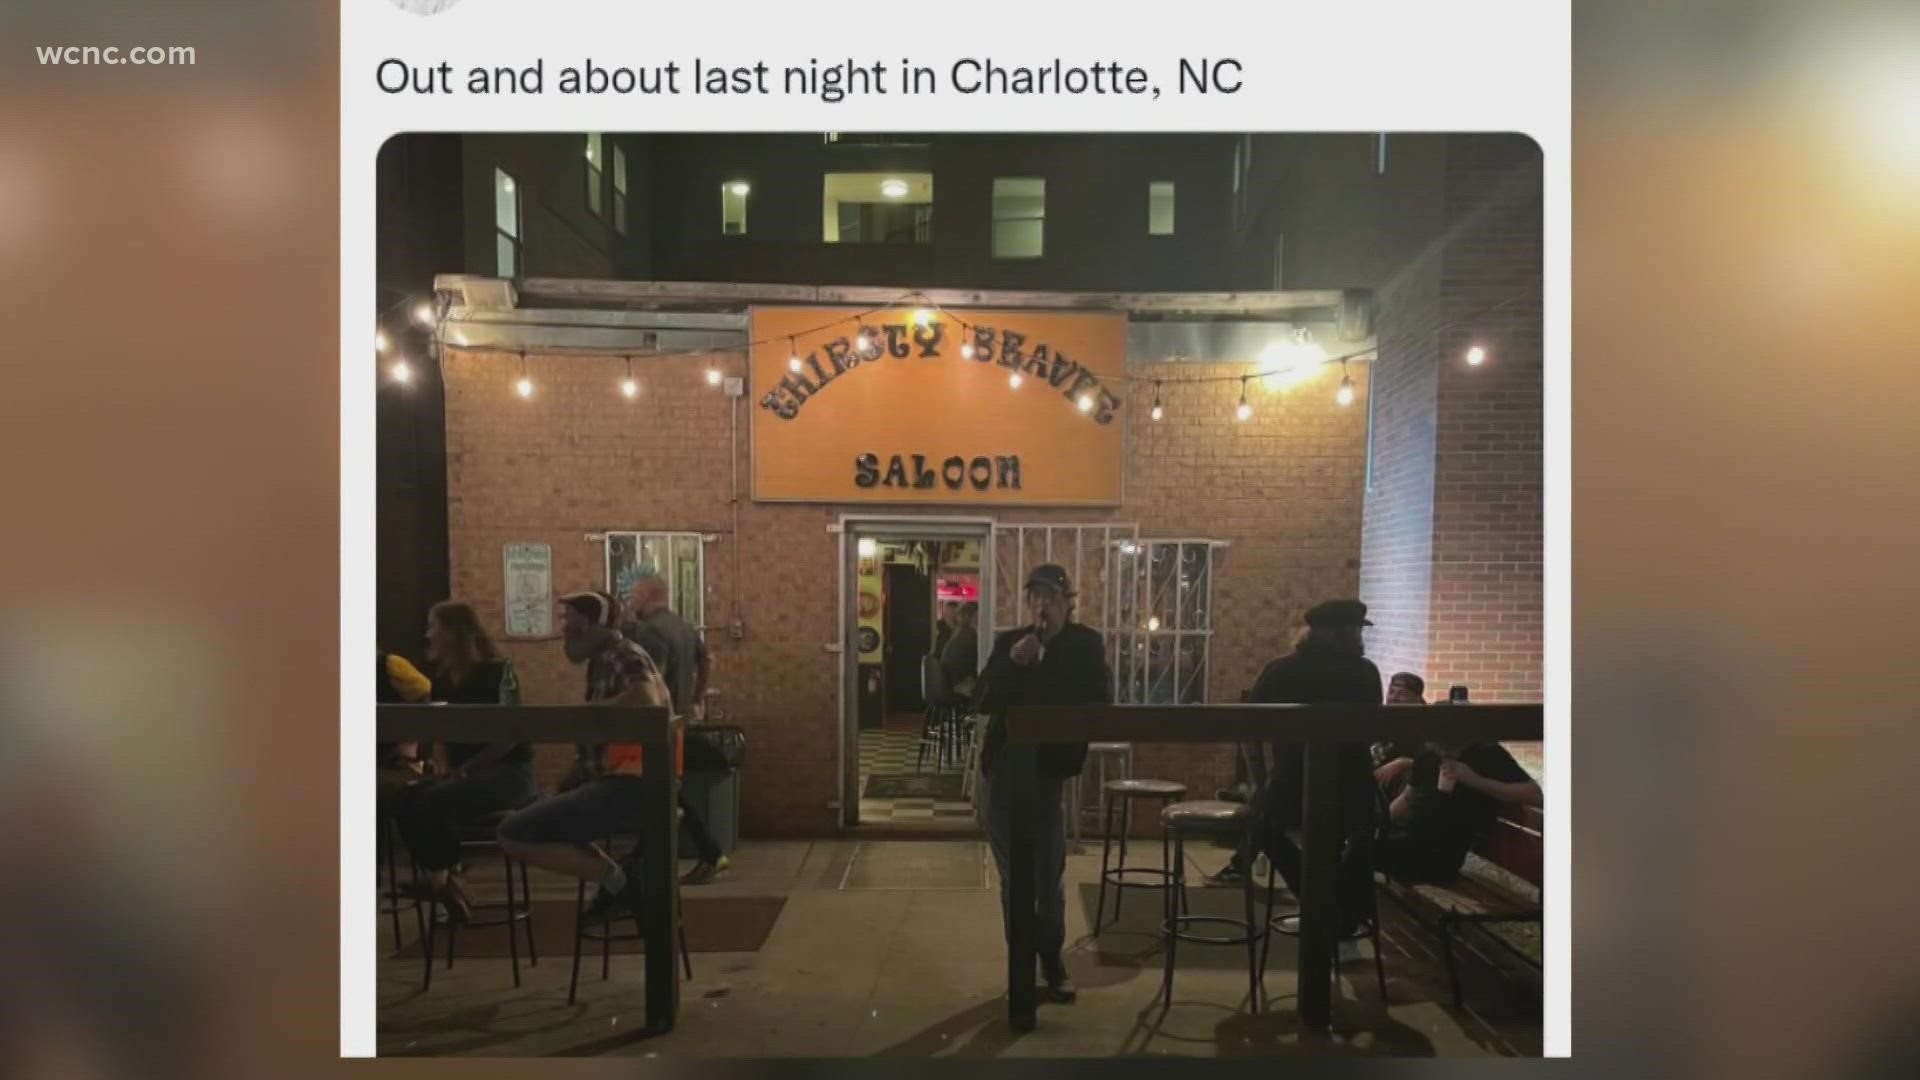 The band's frontman Mick Jagger was spotted at a famed Charlotte dive bar on Thursday.